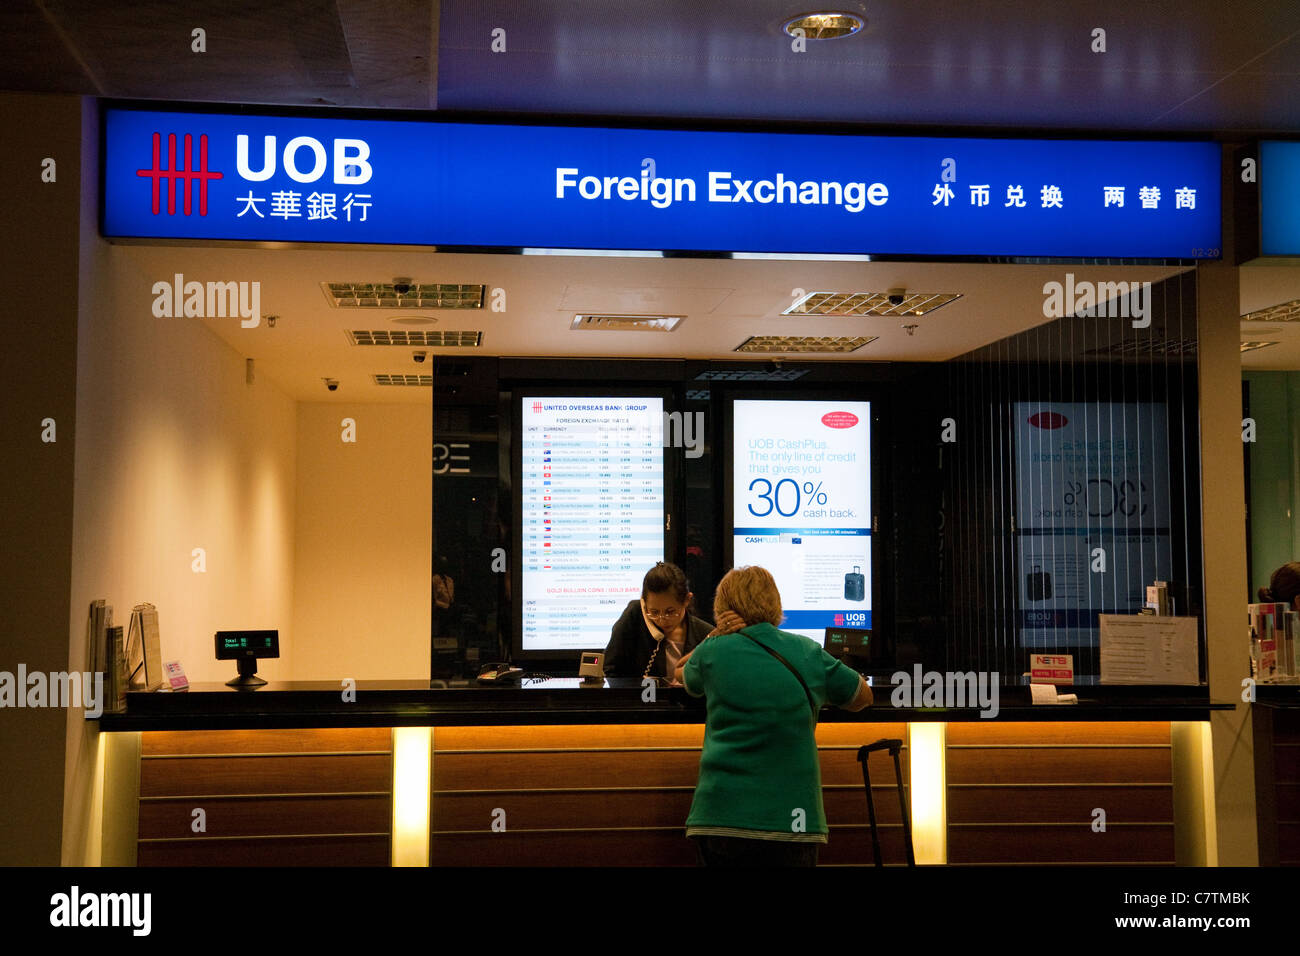 United Overseas Bank ( UOB ) foreign exchange at Changi airport Singapore Stock Photo